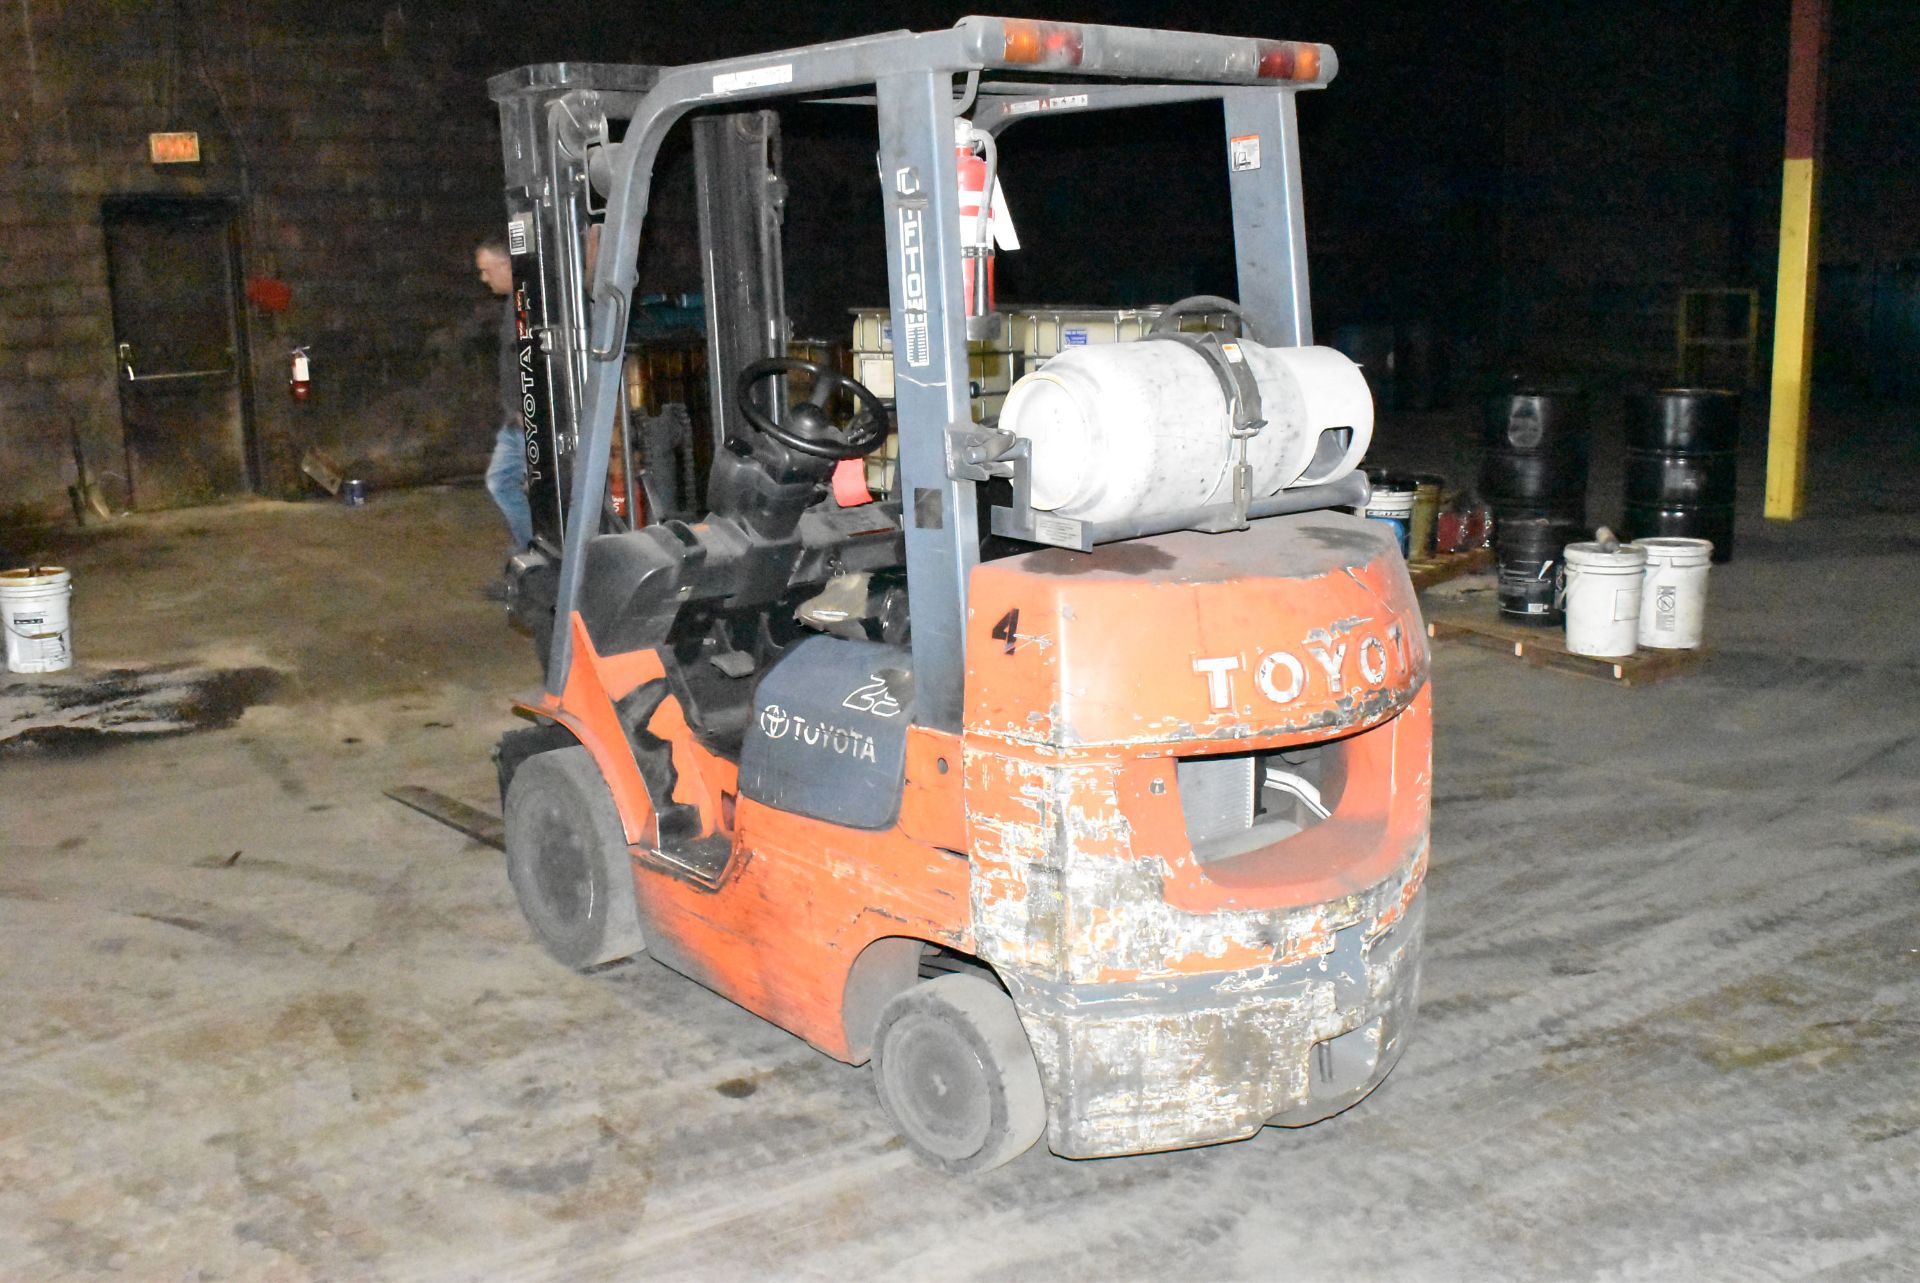 TOYOTA 7FGCU25 5,000LB CAPACITY LPG FORKLIFT WITH 189" MAX VERTICAL REACH, 3-STAGE MAST, SIDE SHIFT, - Image 4 of 7